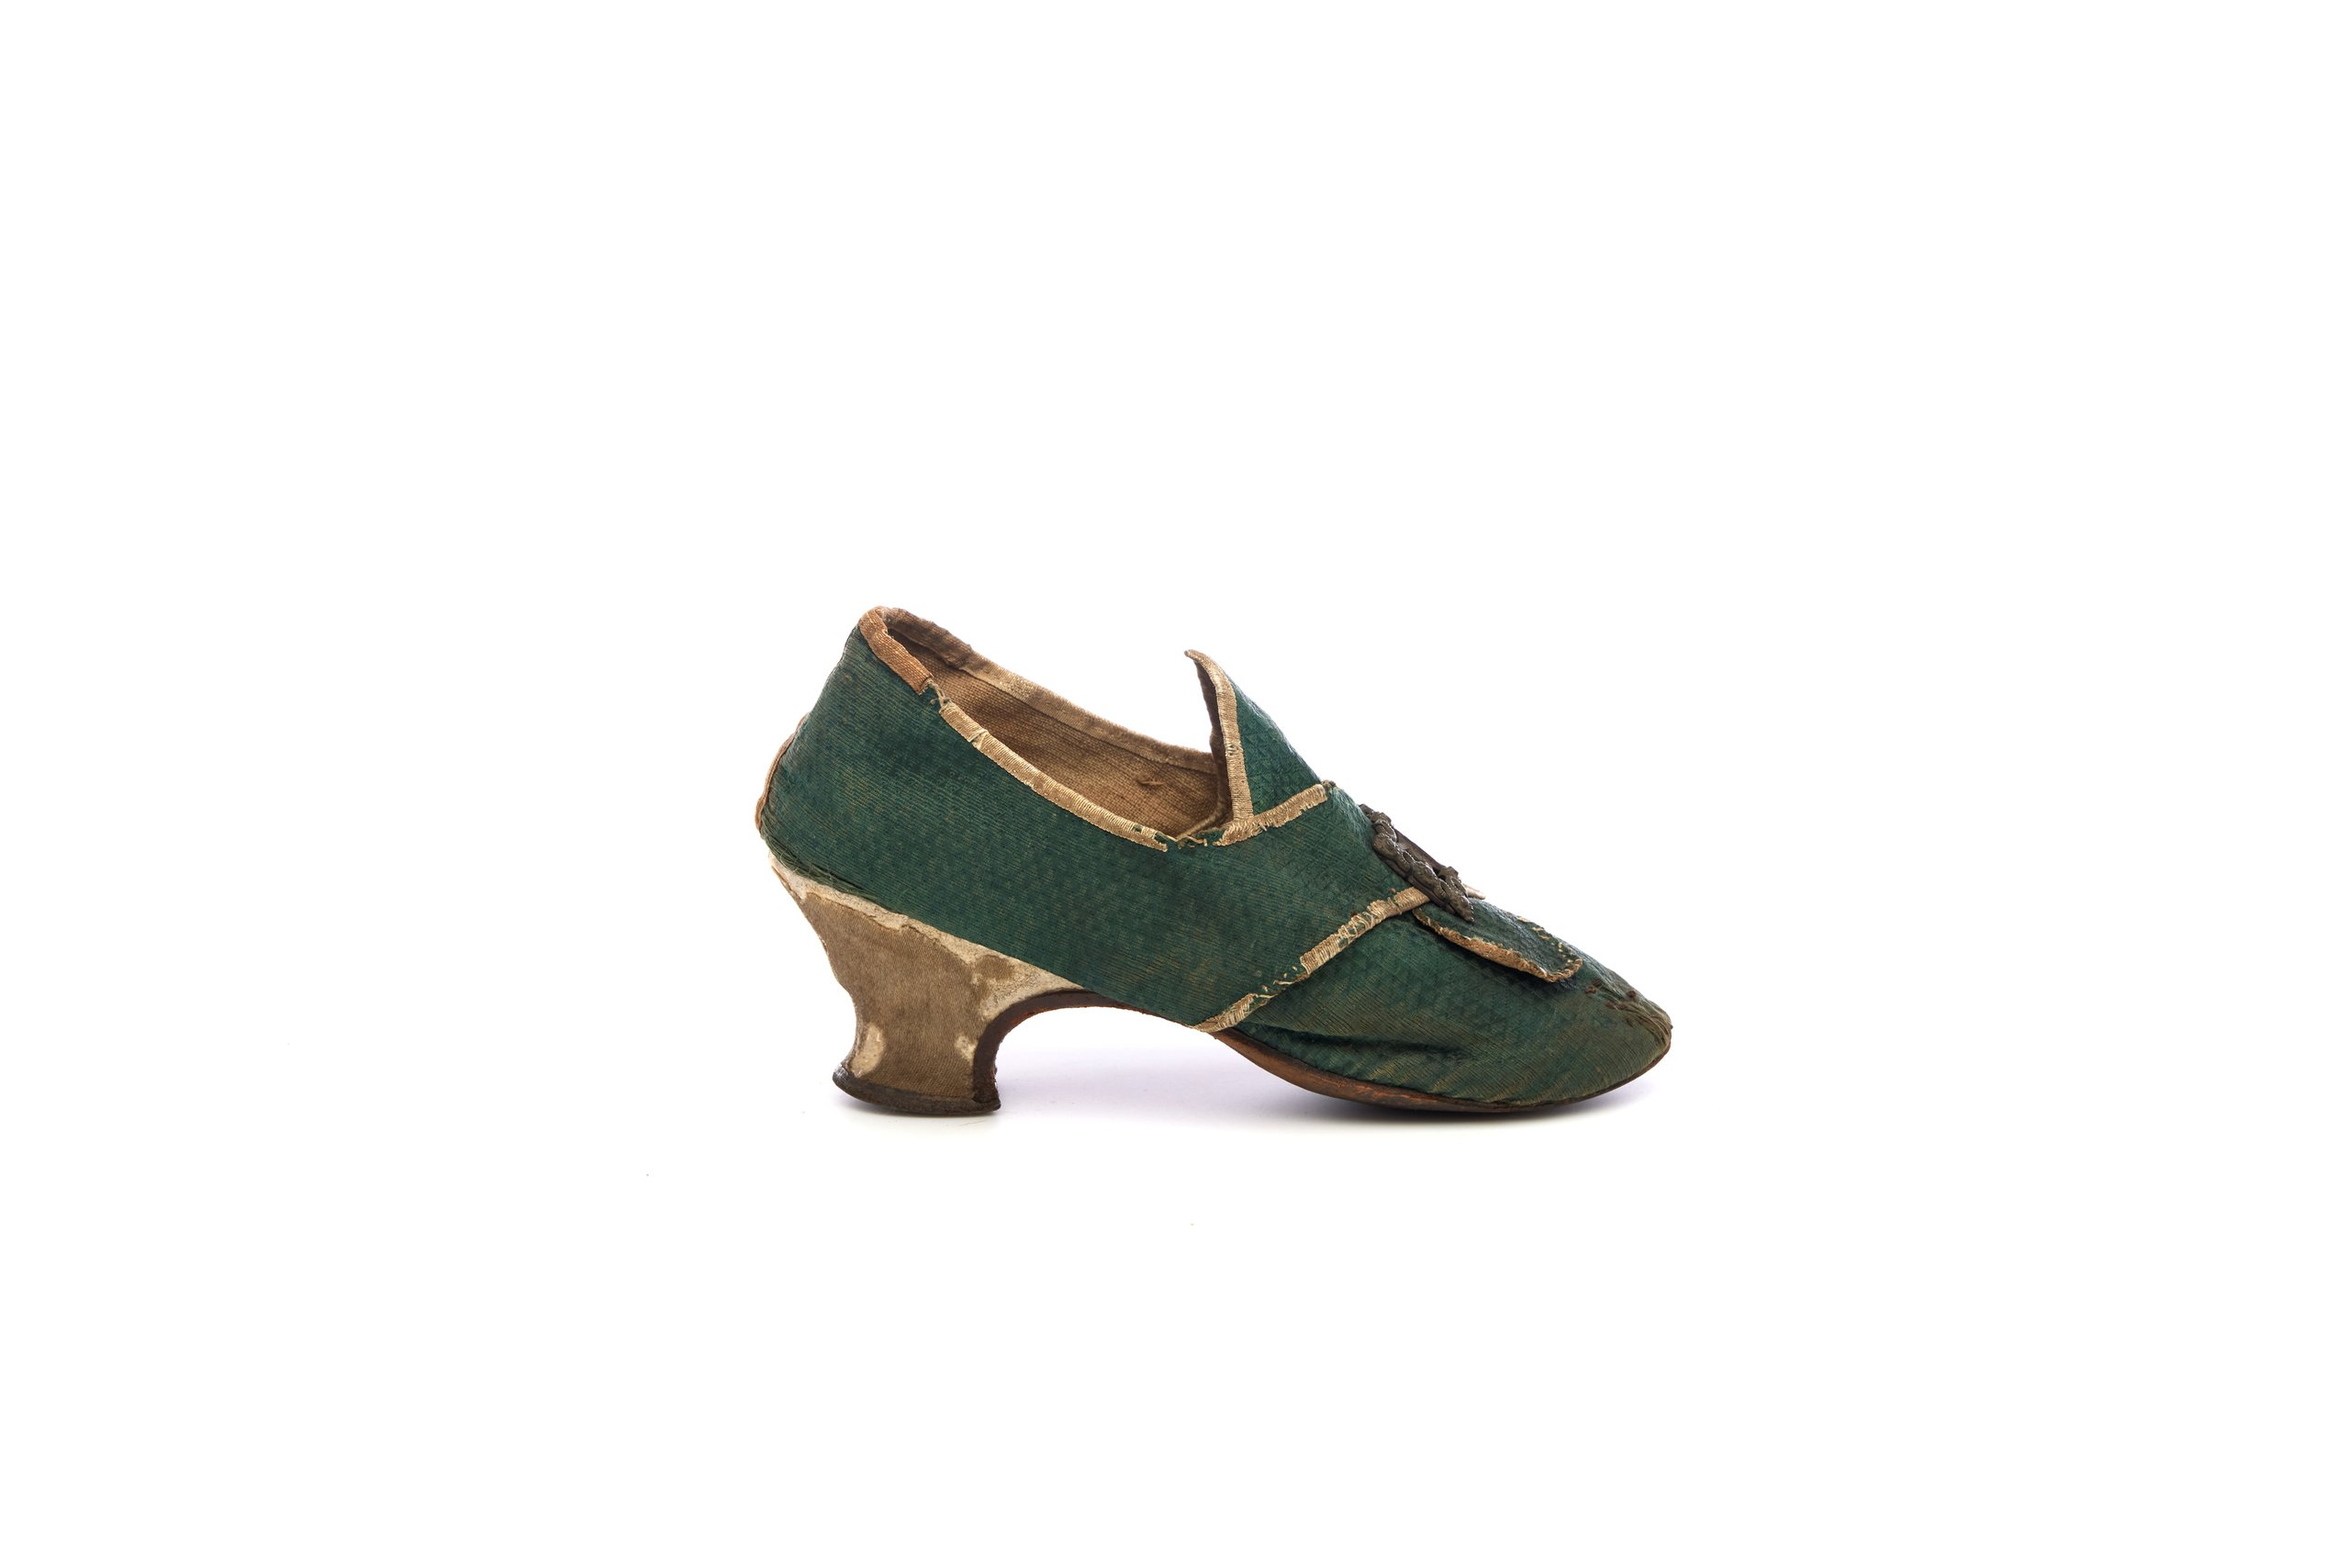 Pair of buckle shoes from the Joseph Box collection